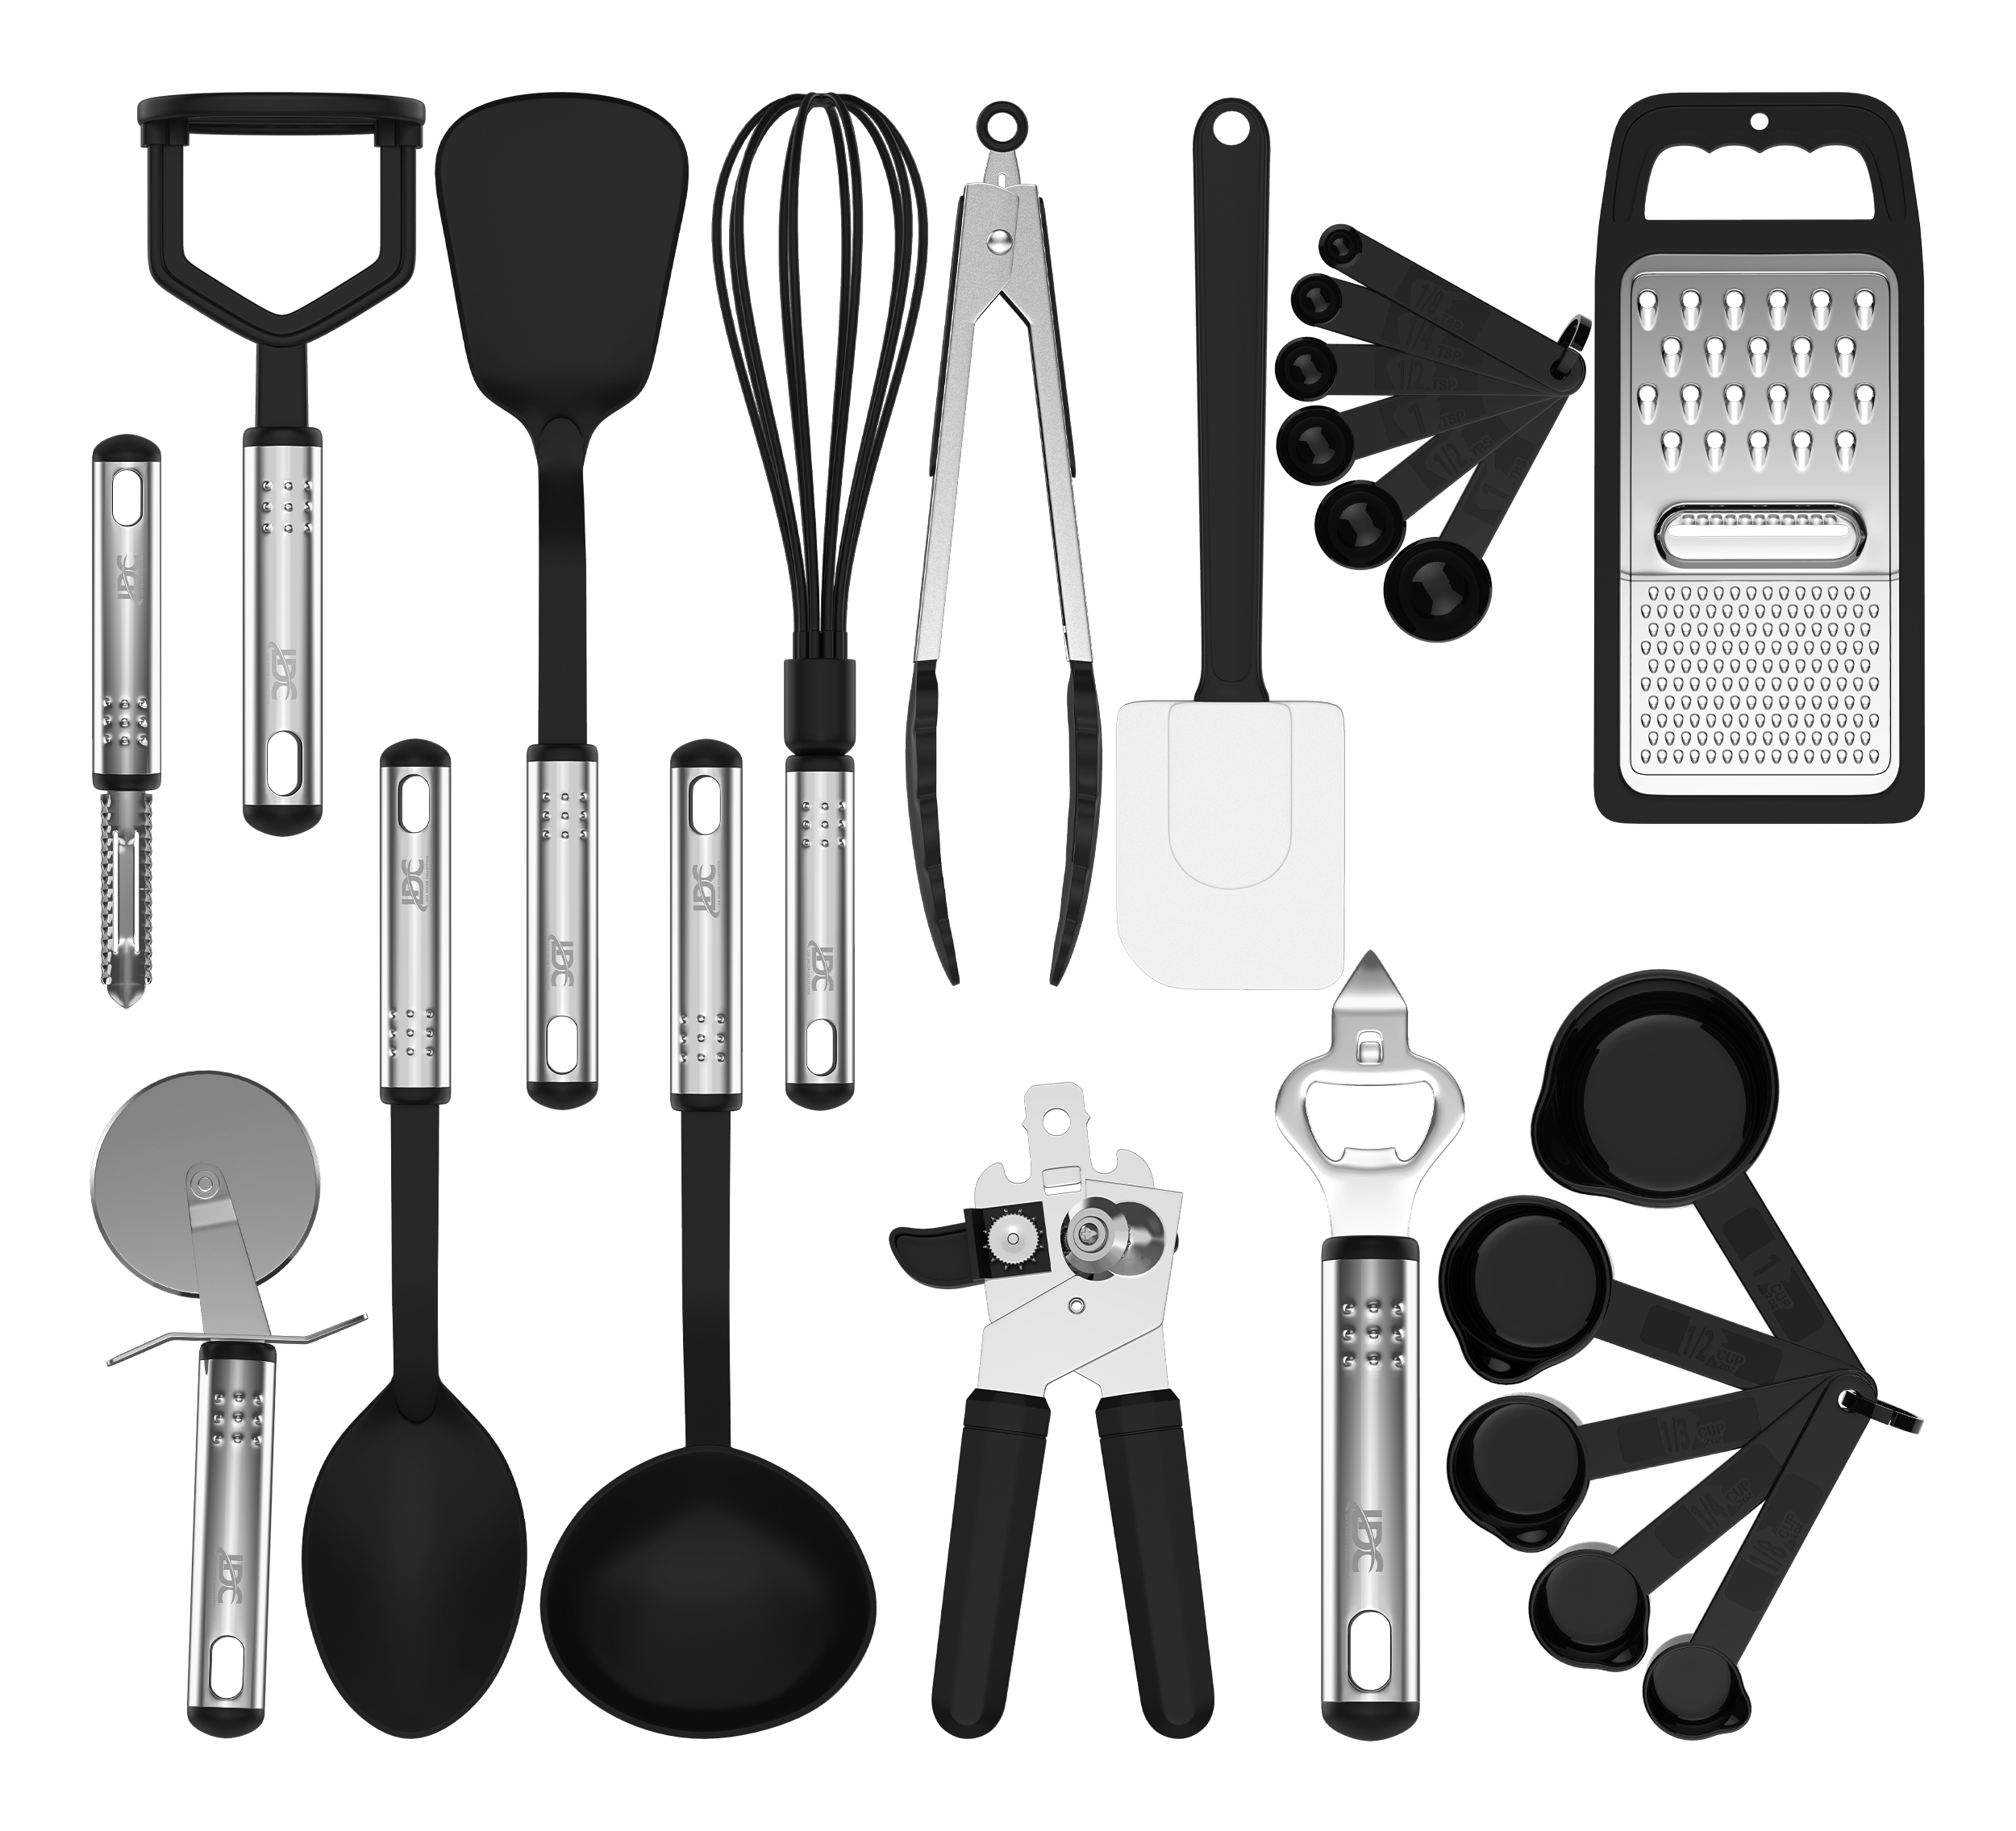 Lux Decor Collection Cooking Utensils Set-Kitchen Accessories, Nylon Cookware Set-Kitchen Gadget Tools of Black 23 Pieces - image 1 of 15